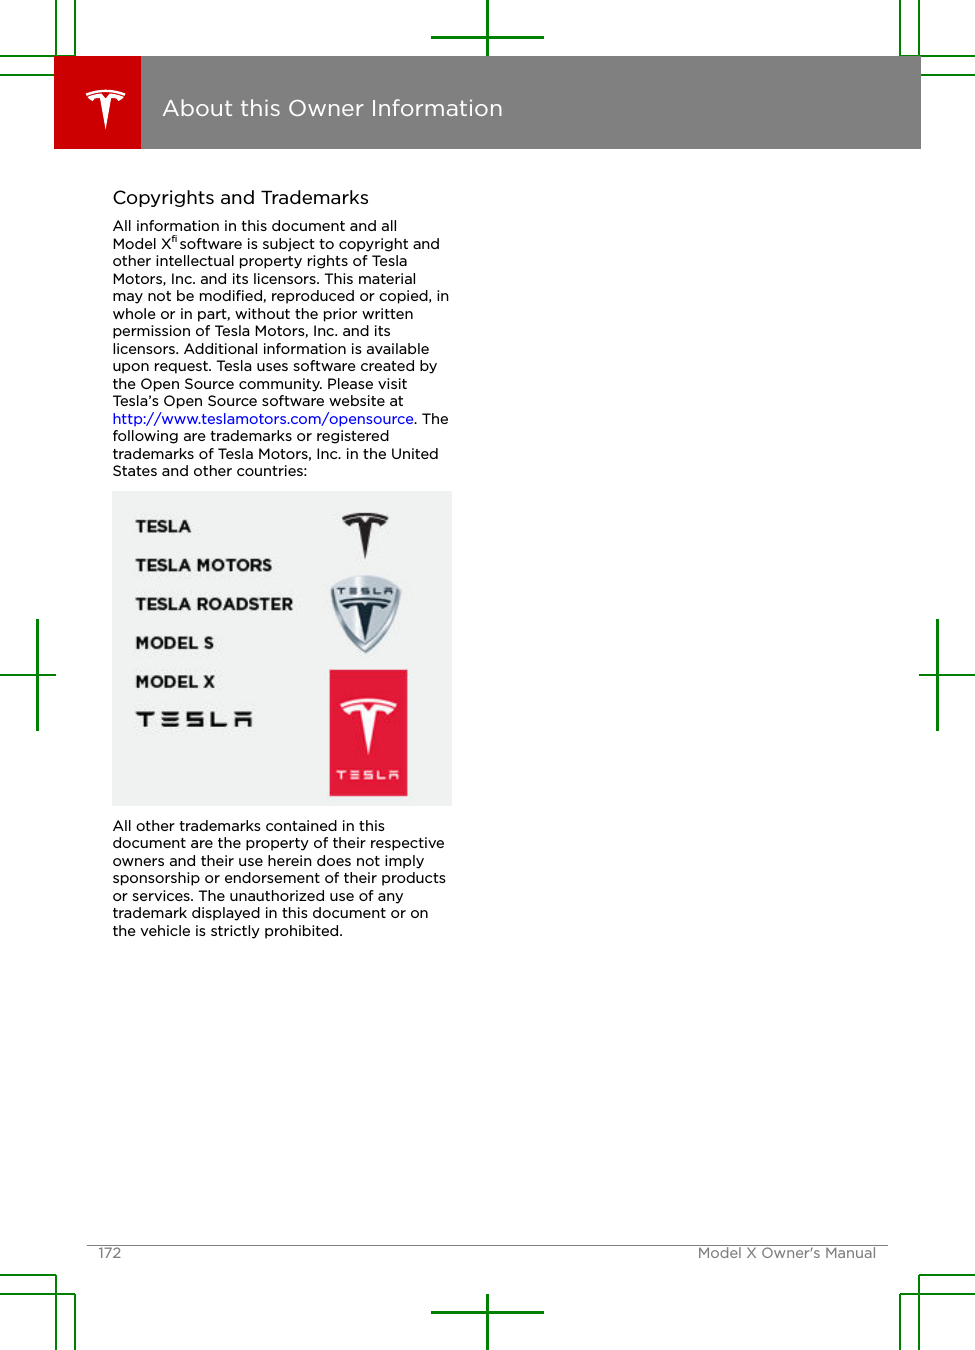 Copyrights and TrademarksAll information in this document and allModel X® software is subject to copyright andother intellectual property rights of TeslaMotors, Inc. and its licensors. This materialmay not be modiﬁed, reproduced or copied, inwhole or in part, without the prior writtenpermission of Tesla Motors, Inc. and itslicensors. Additional information is availableupon request. Tesla uses software created bythe Open Source community. Please visitTesla’s Open Source software website at http://www.teslamotors.com/opensource. Thefollowing are trademarks or registeredtrademarks of Tesla Motors, Inc. in the UnitedStates and other countries:All other trademarks contained in thisdocument are the property of their respectiveowners and their use herein does not implysponsorship or endorsement of their productsor services. The unauthorized use of anytrademark displayed in this document or onthe vehicle is strictly prohibited.About this Owner Information172 Model X Owner&apos;s Manual